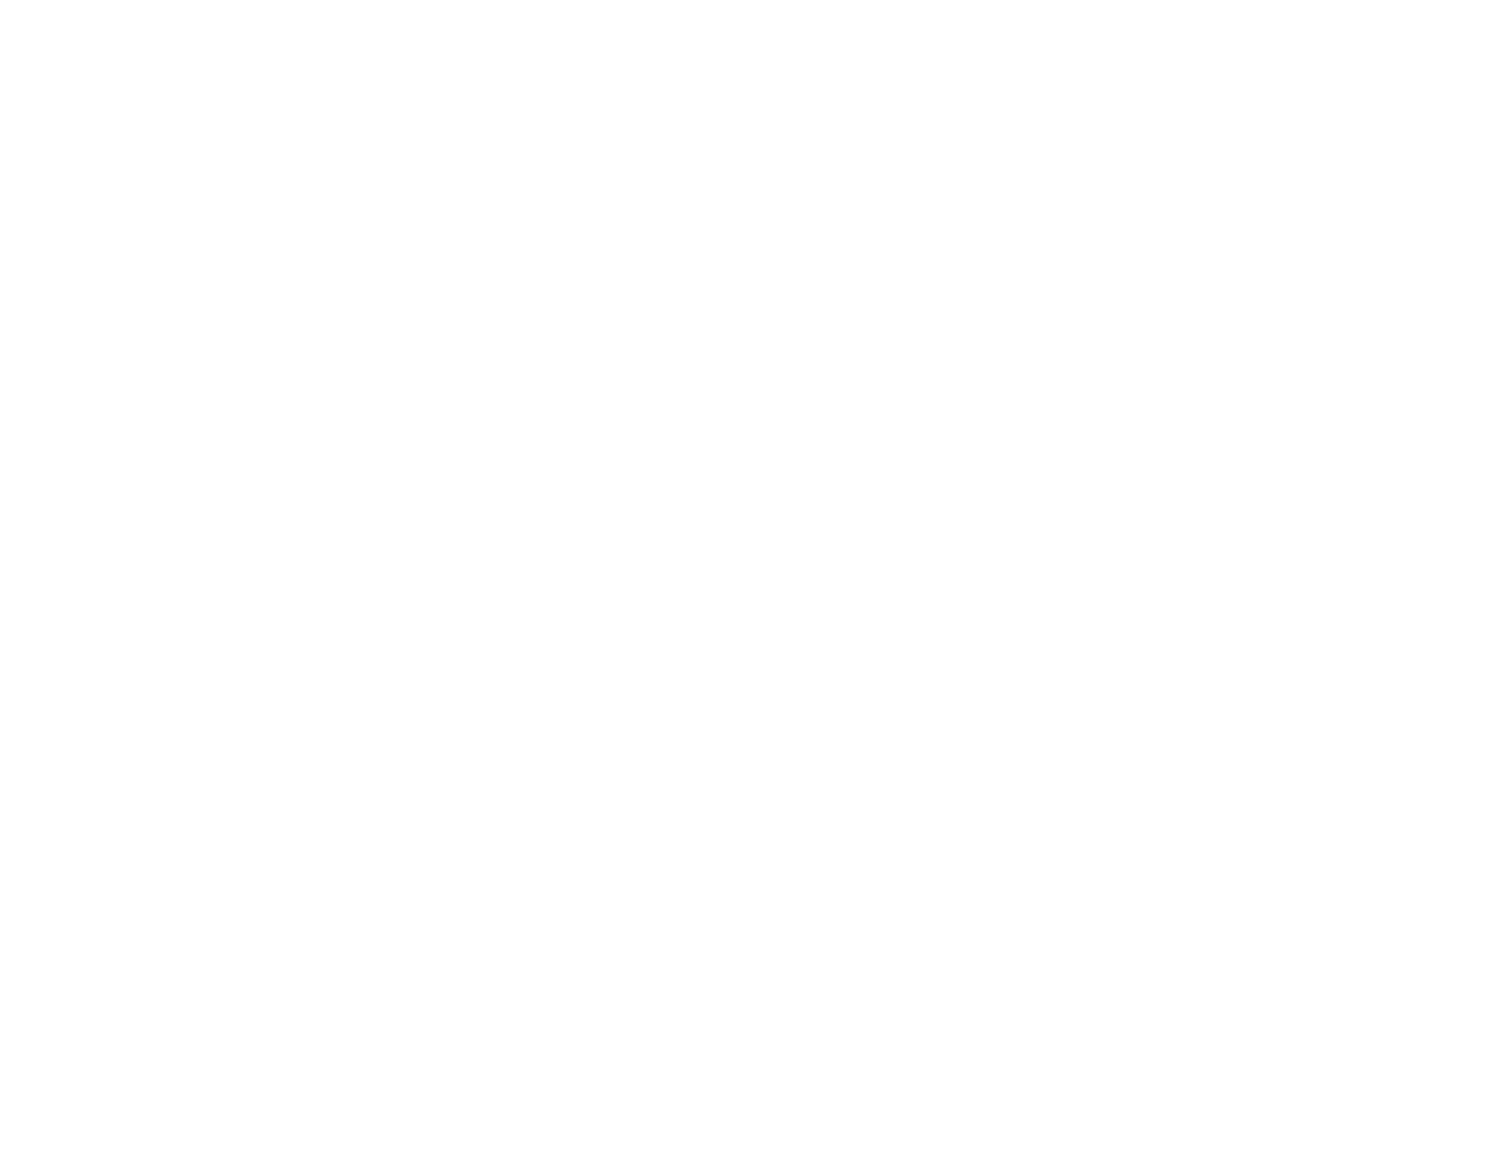 Guild on 30th